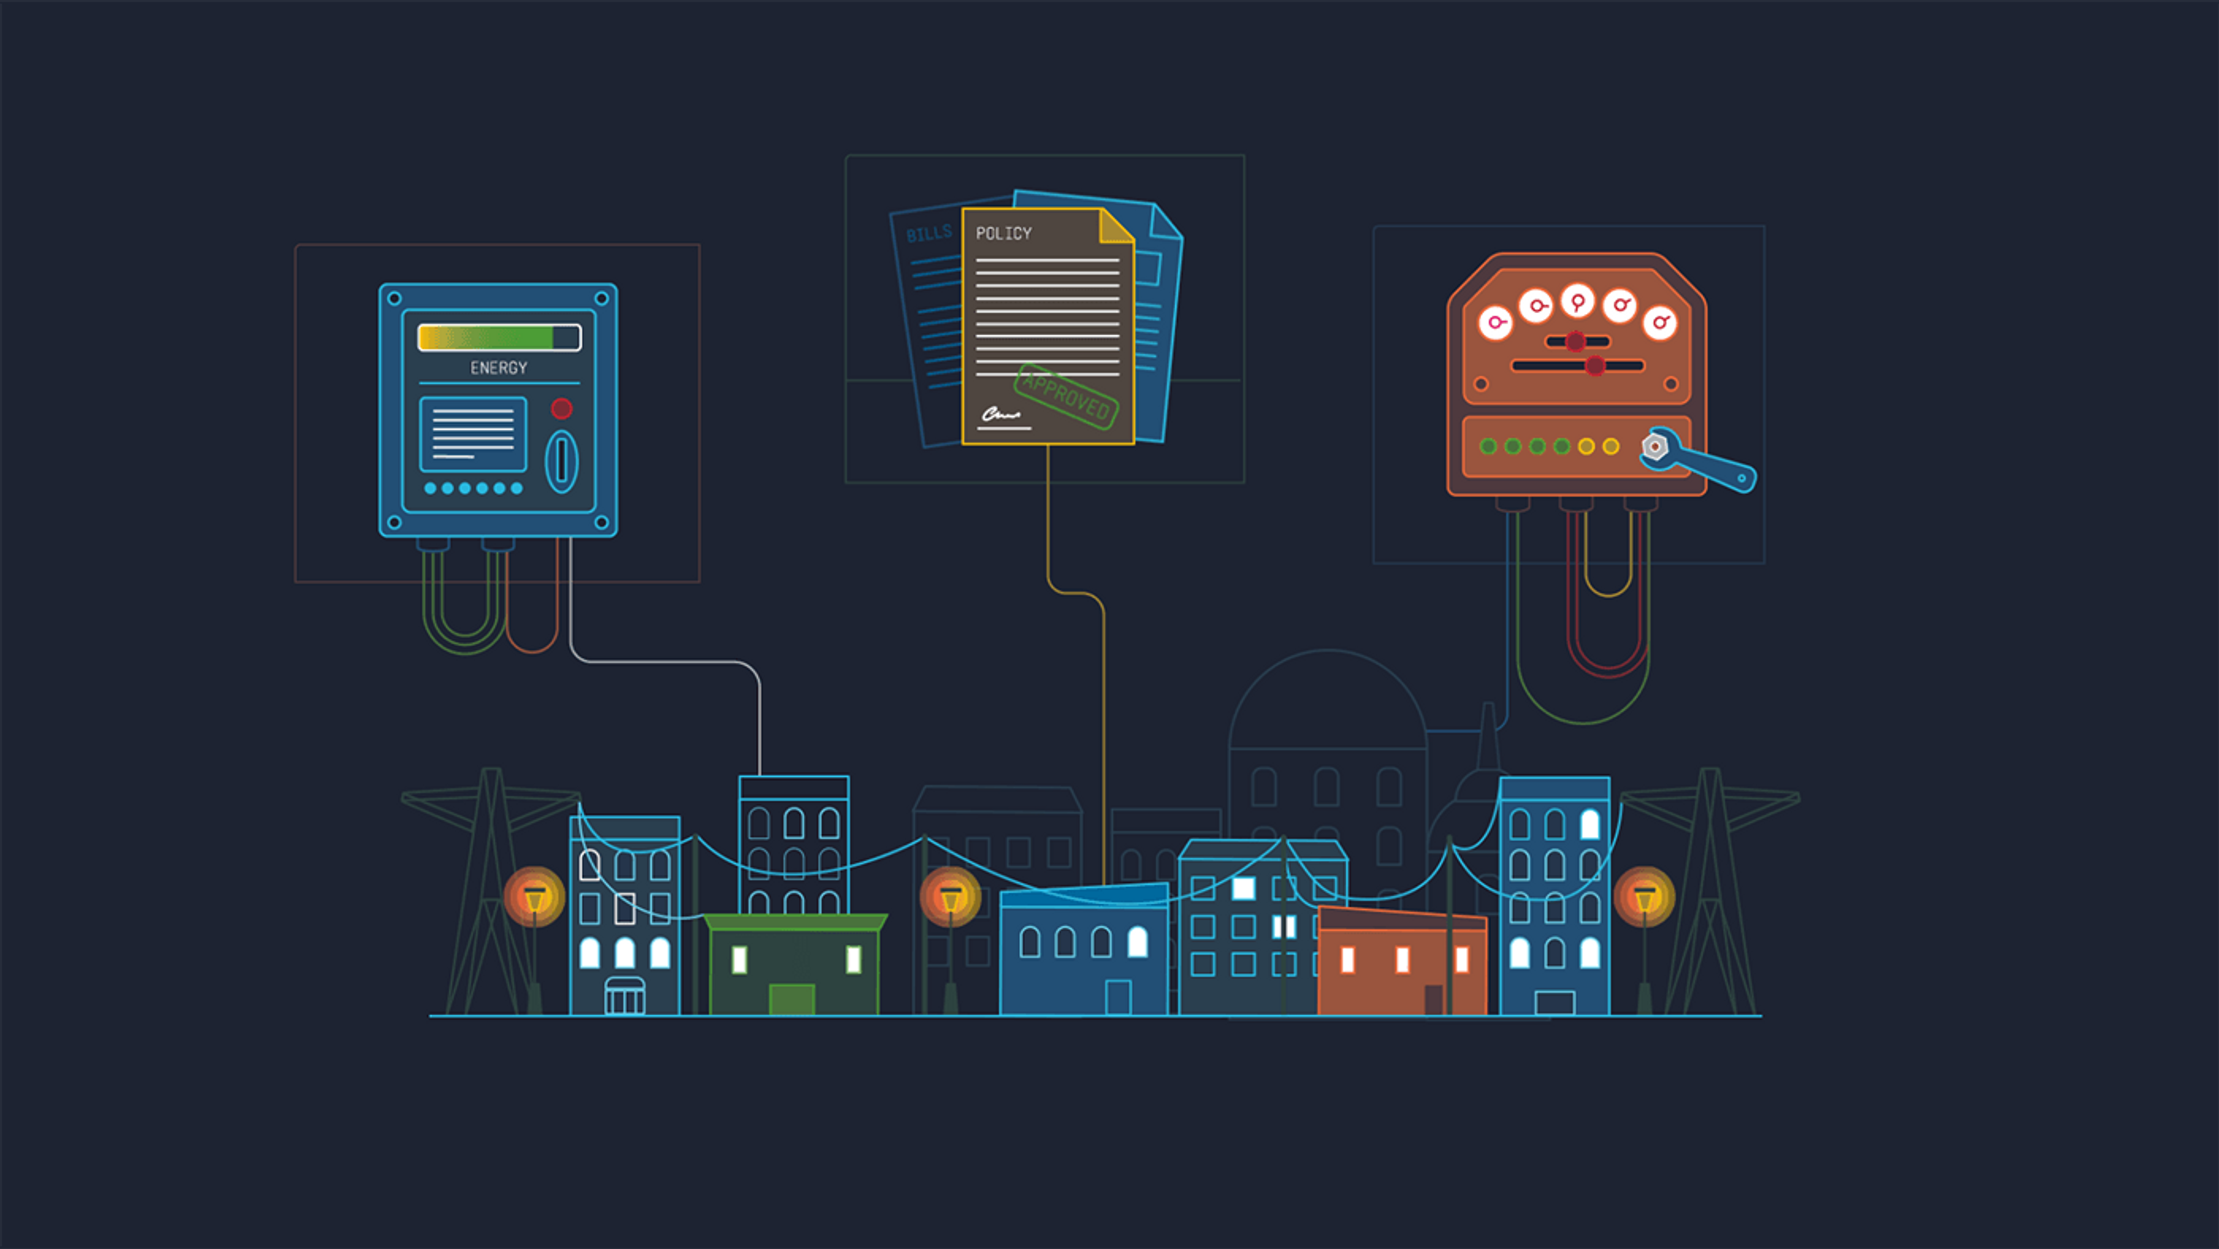 Some graphics made for the Sustainable Energy Collection. It shows a small colourful city street with street lights, wires and pylons. Above this image are three icons representing part of the energy system like power boxes and documents.